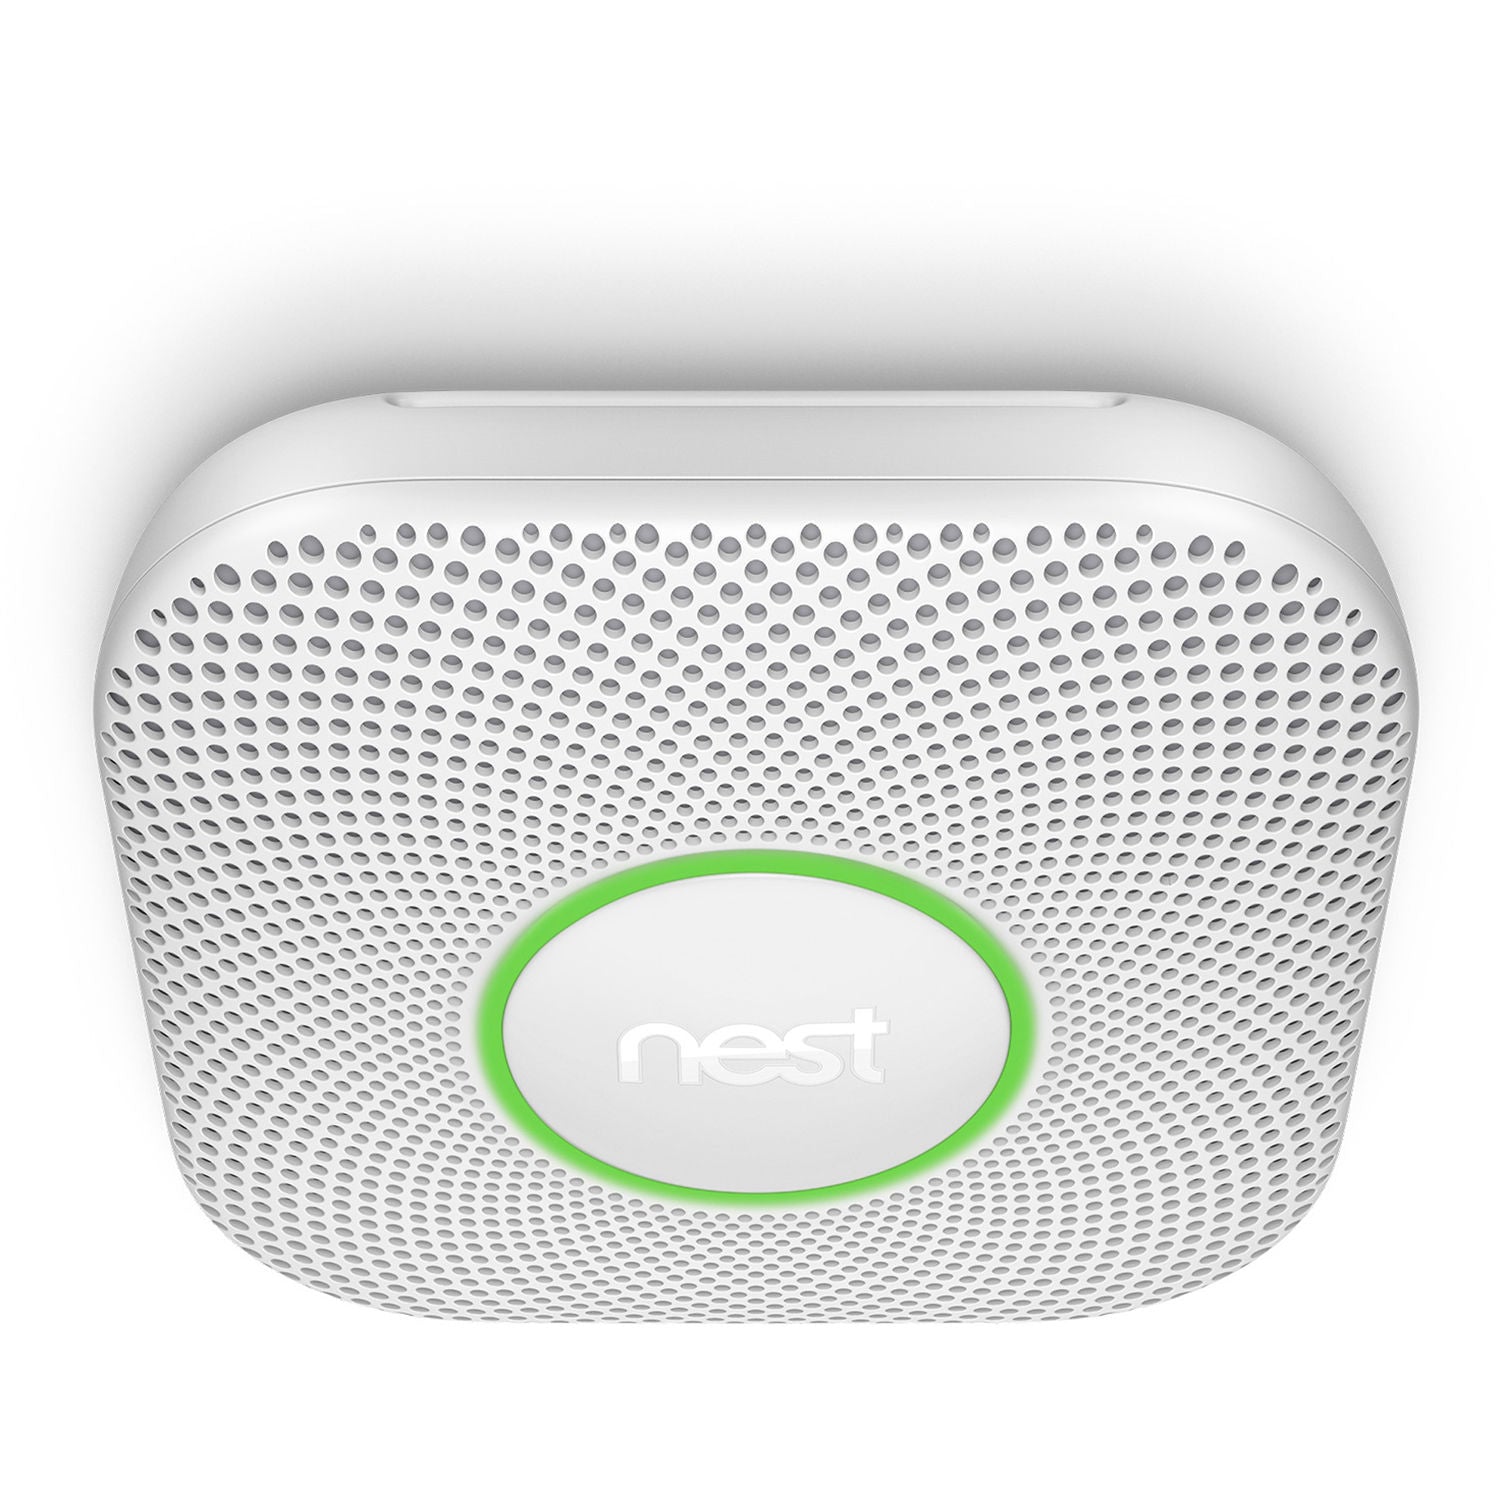 Google GS3005PWLUS Nest Protect Wired Powered Smoke and Carbon Monoxide Alarm 2nd Generation, White